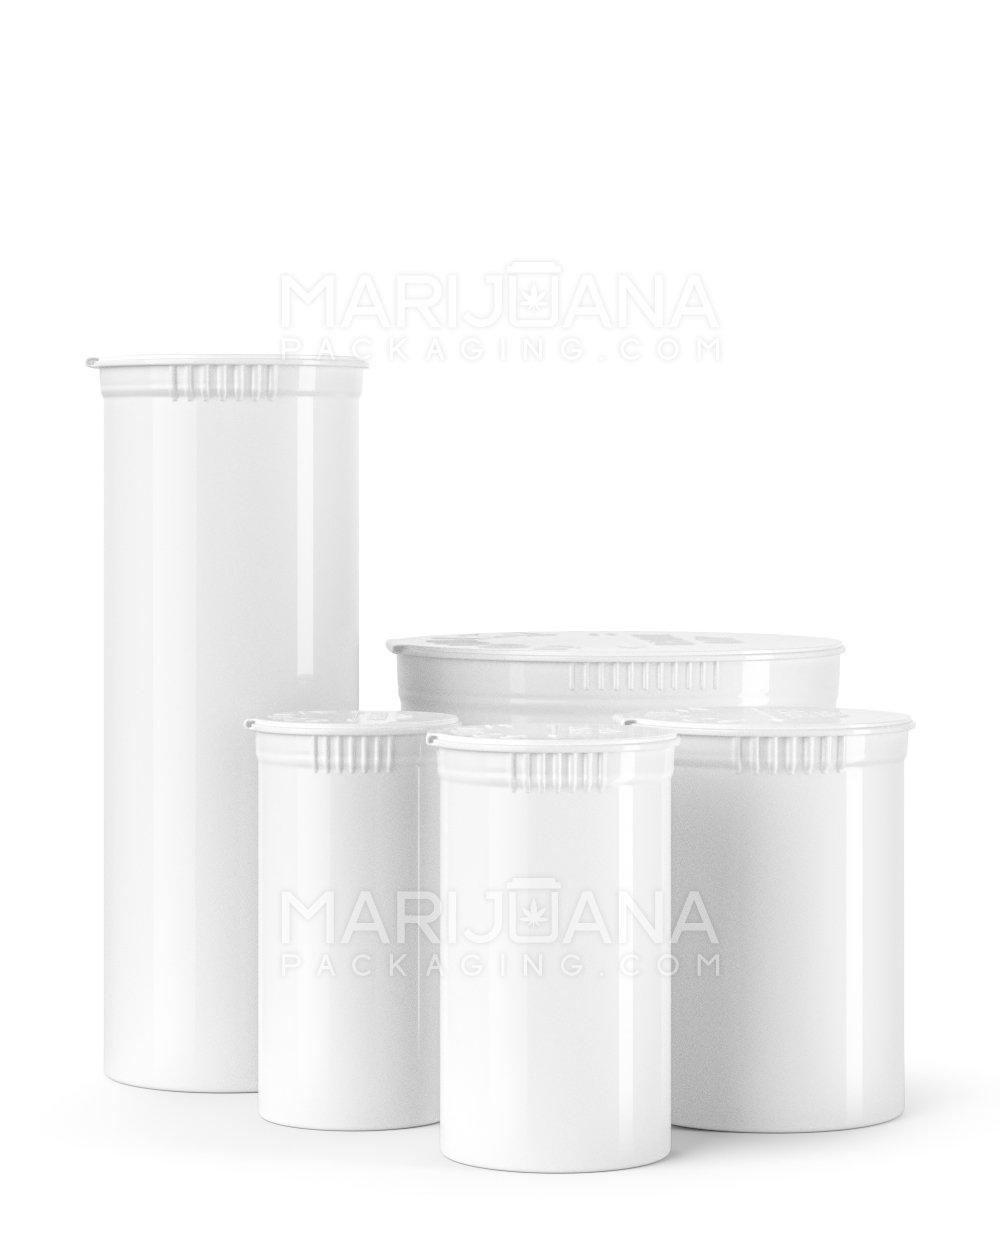 Child Resistant Biodegradable Plastic Pop Top Containers